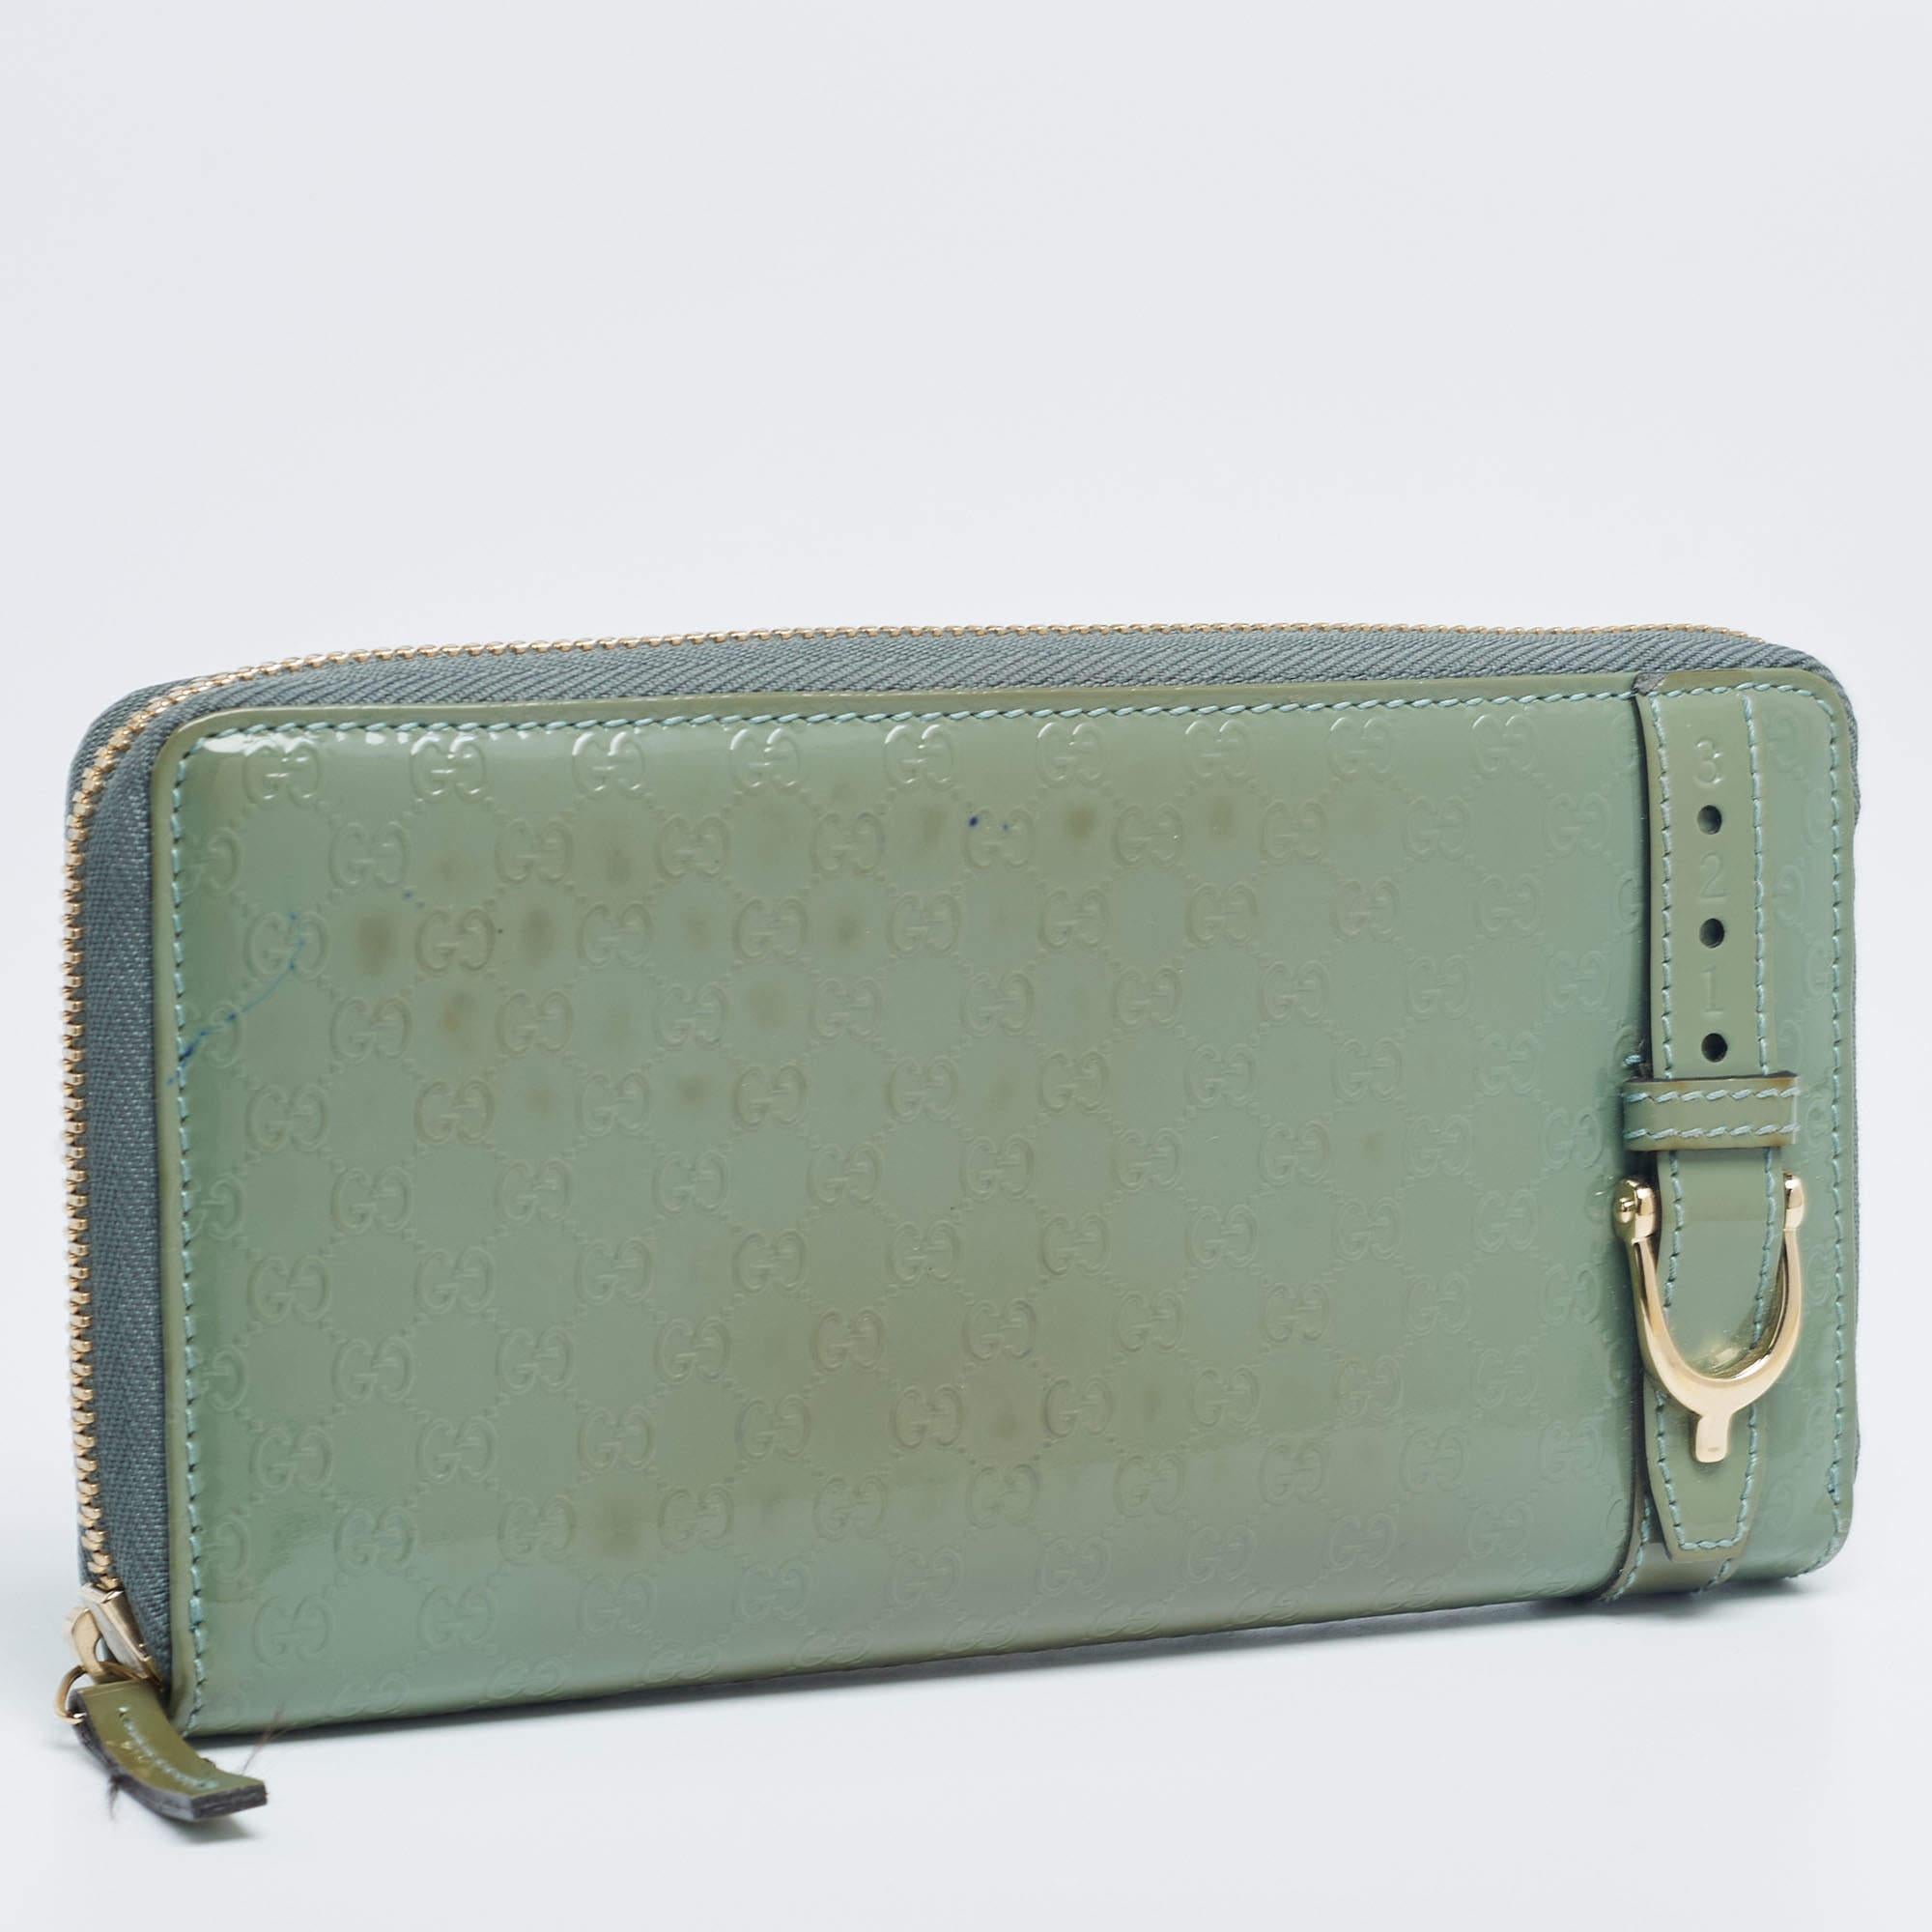 Ensure your essentials are in a secure place with this wallet from Gucci. Crafted using green Microguccissima patent leather, this wallet is decorated with gold-tone hardware and has a zip-around feature. It comes with a well-designed leather-nylon